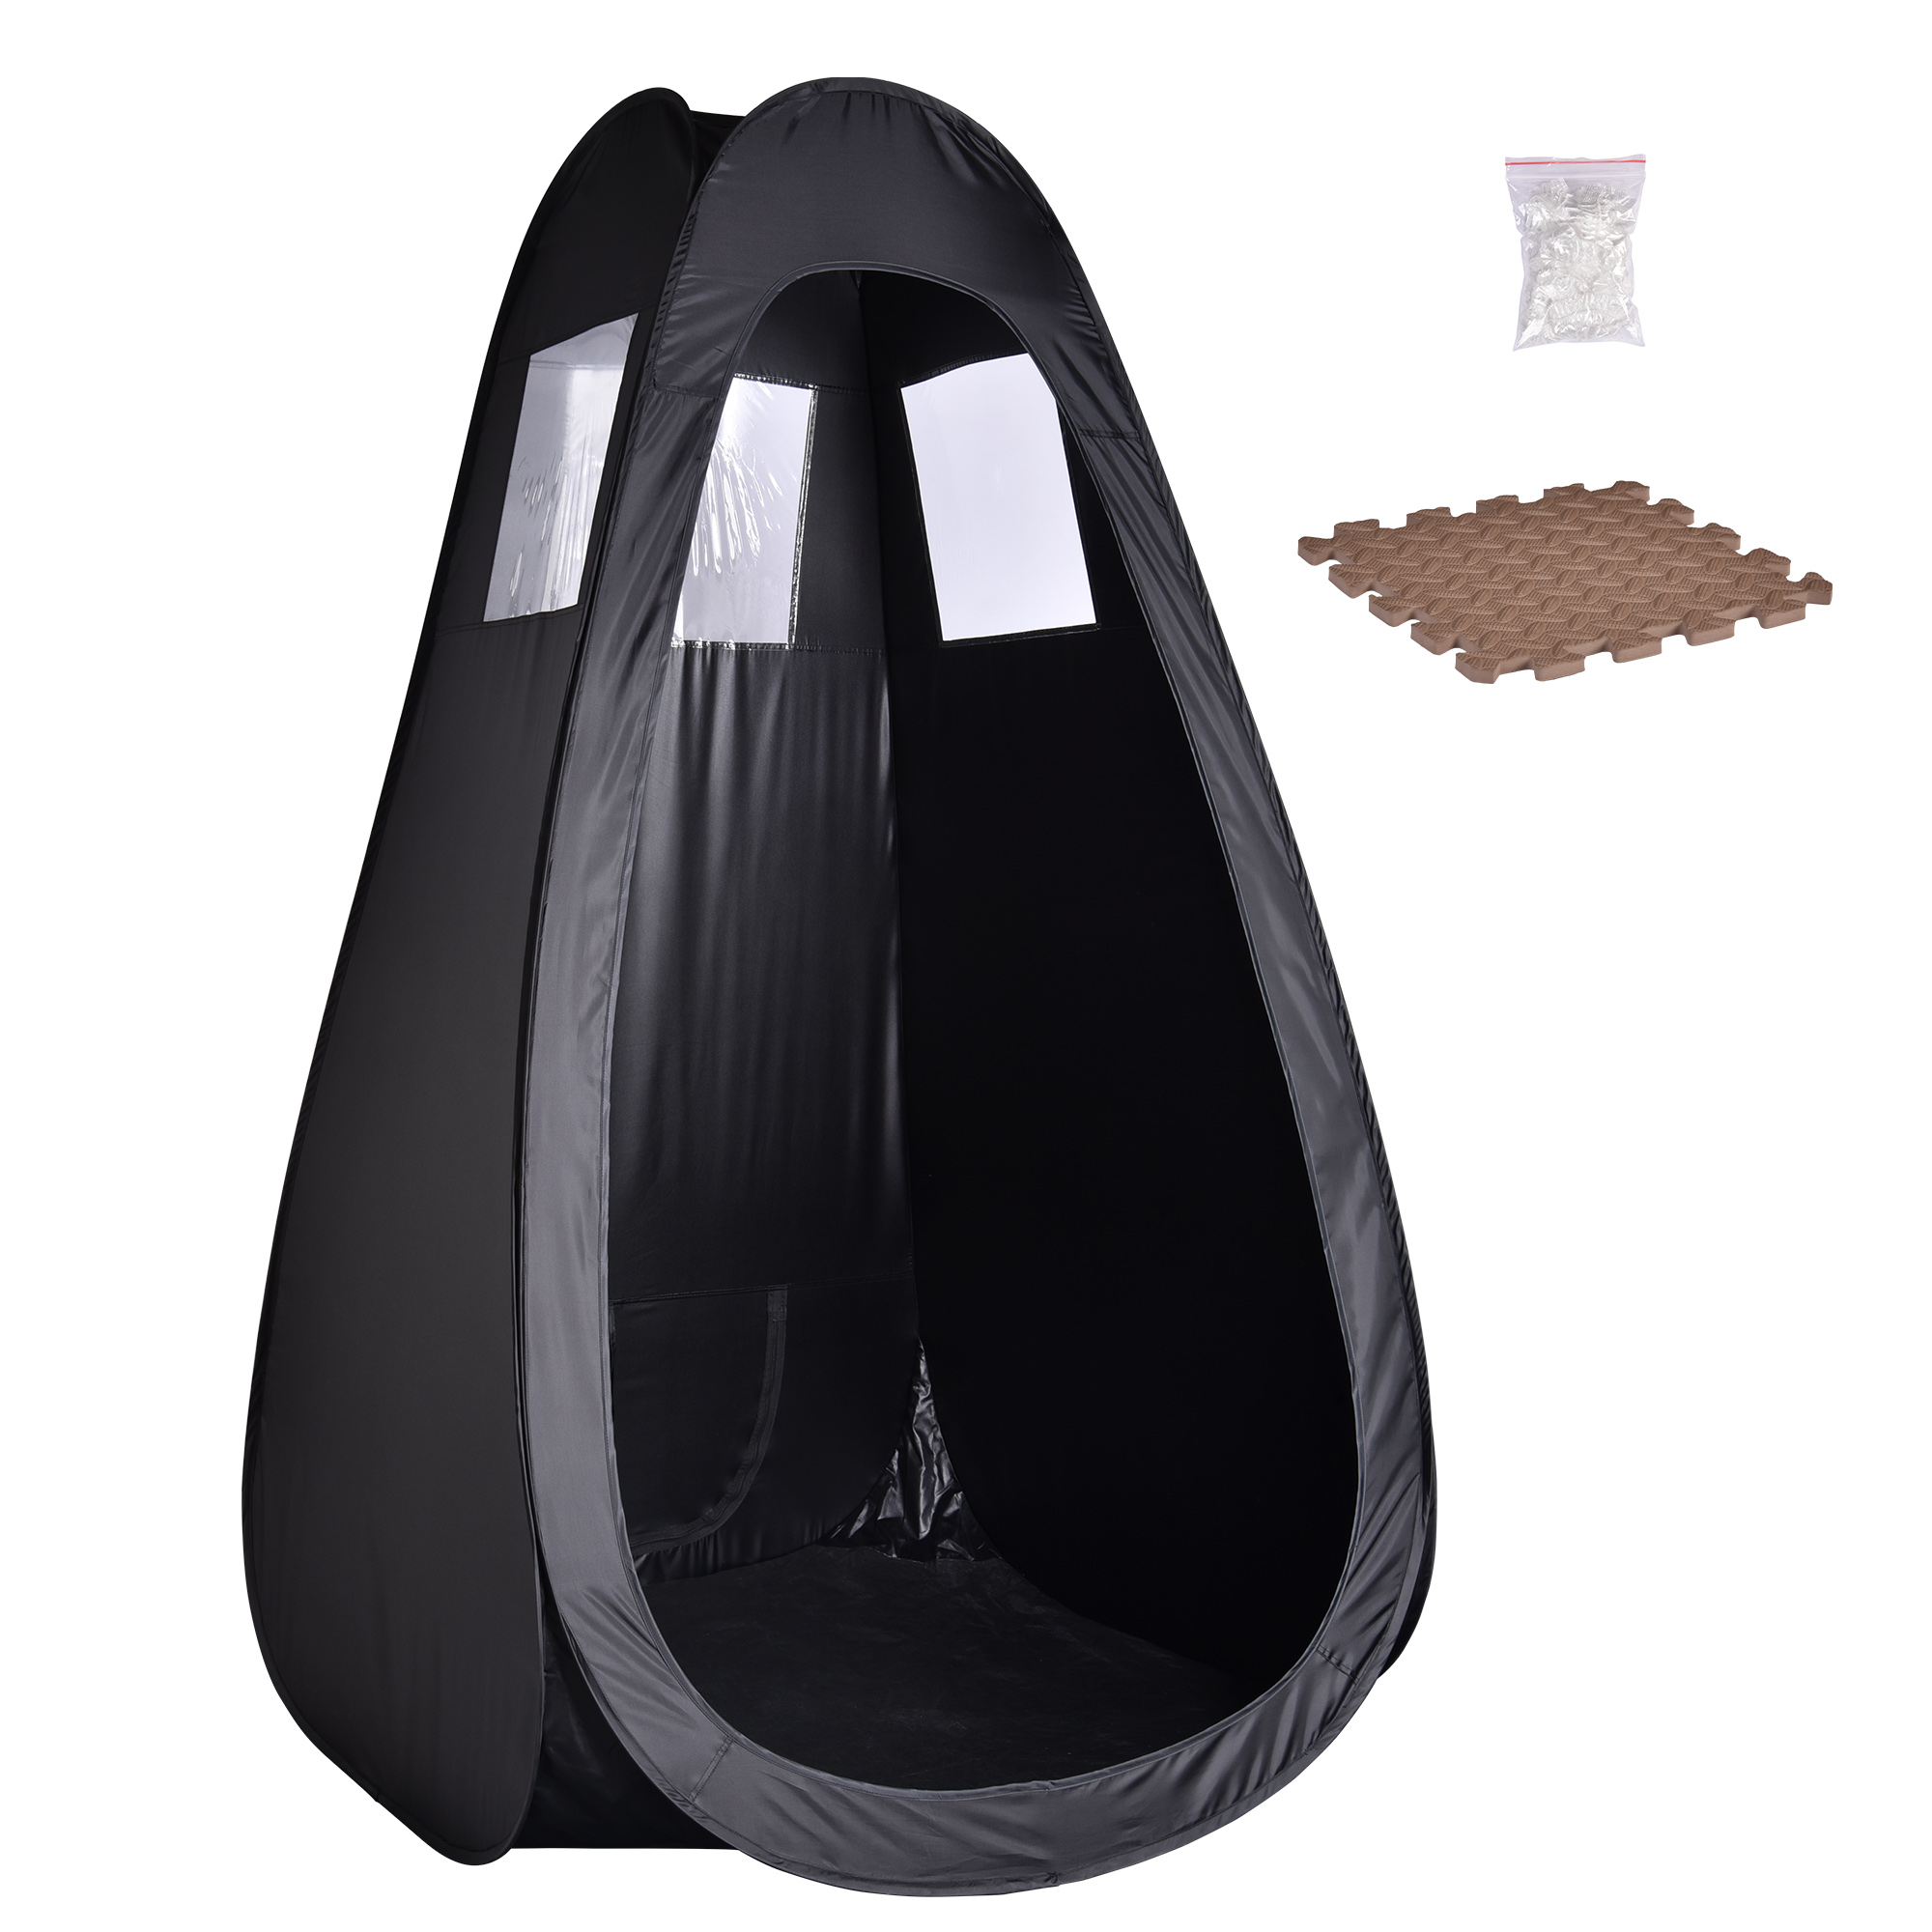 Yescom Black Pop Up Airbrush Makeup Sunless Over Spray Tanning Tent Water-resistant